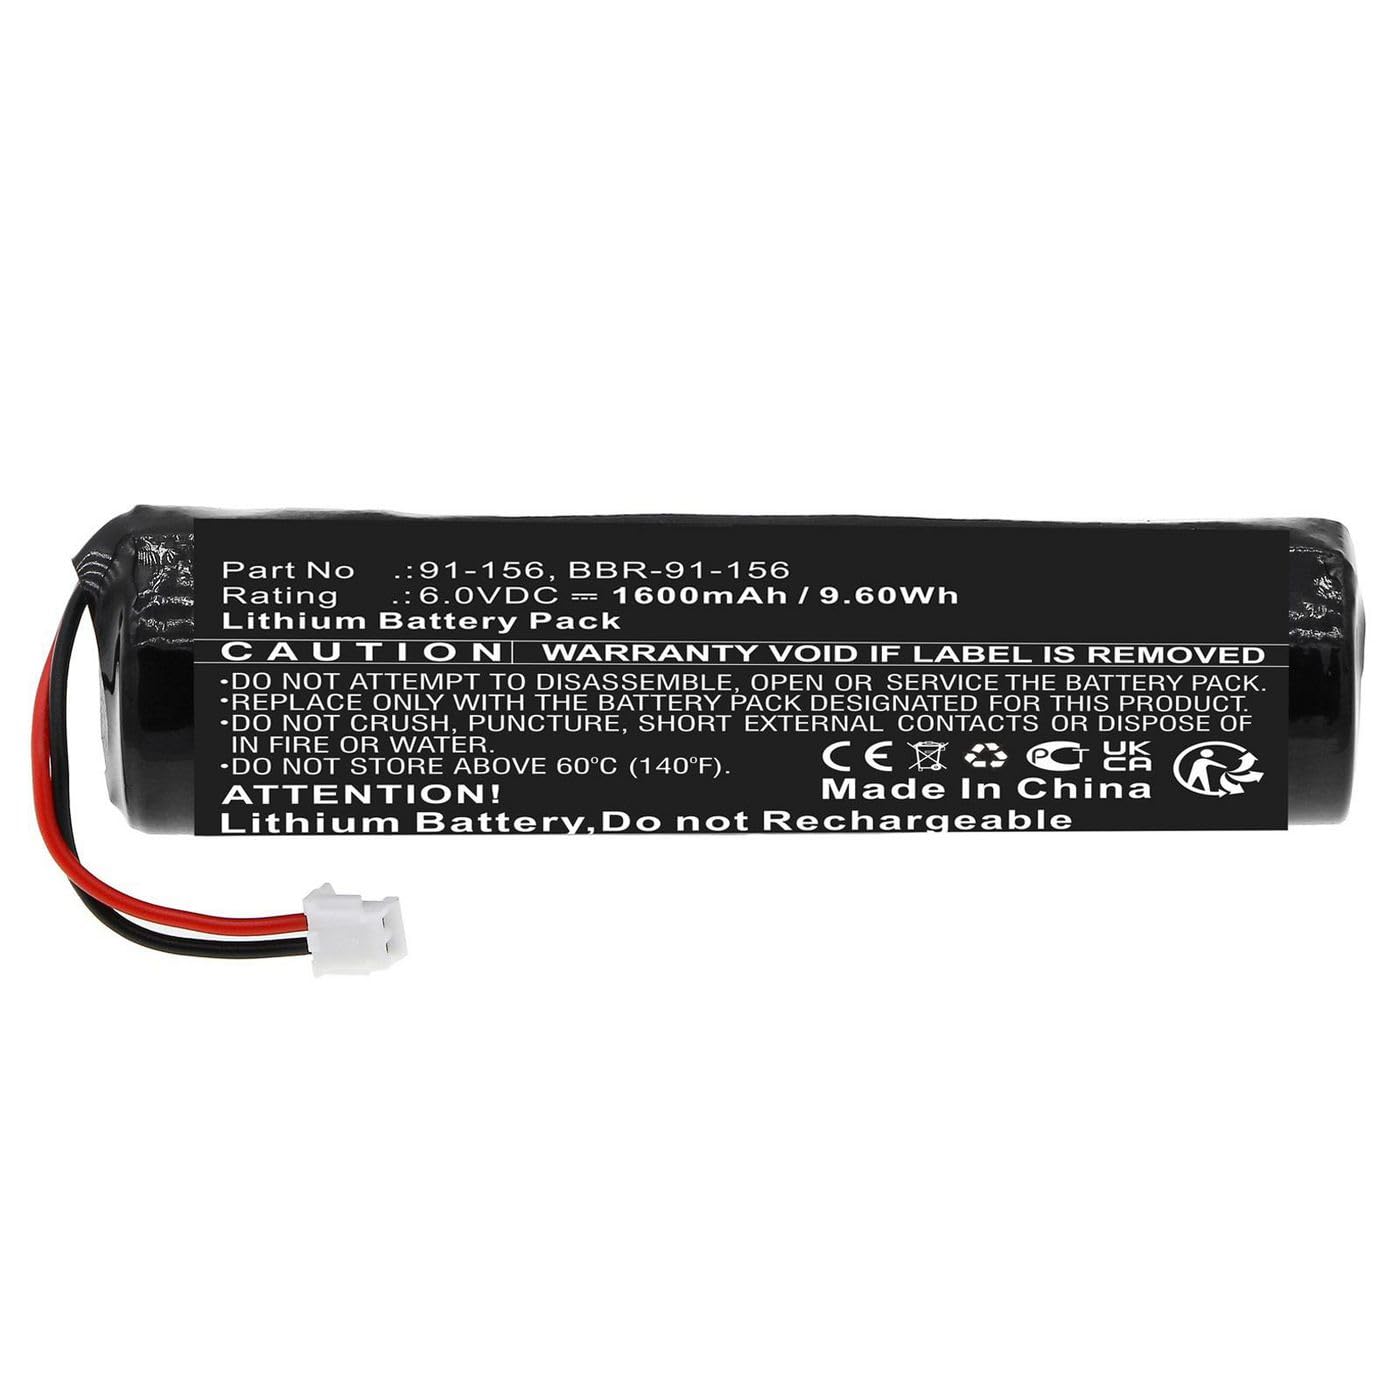 CoreParts Battery for McMurdo Marine Safety & Flotation Devices, W128436670 (Safety & Flotation Devices) von CoreParts